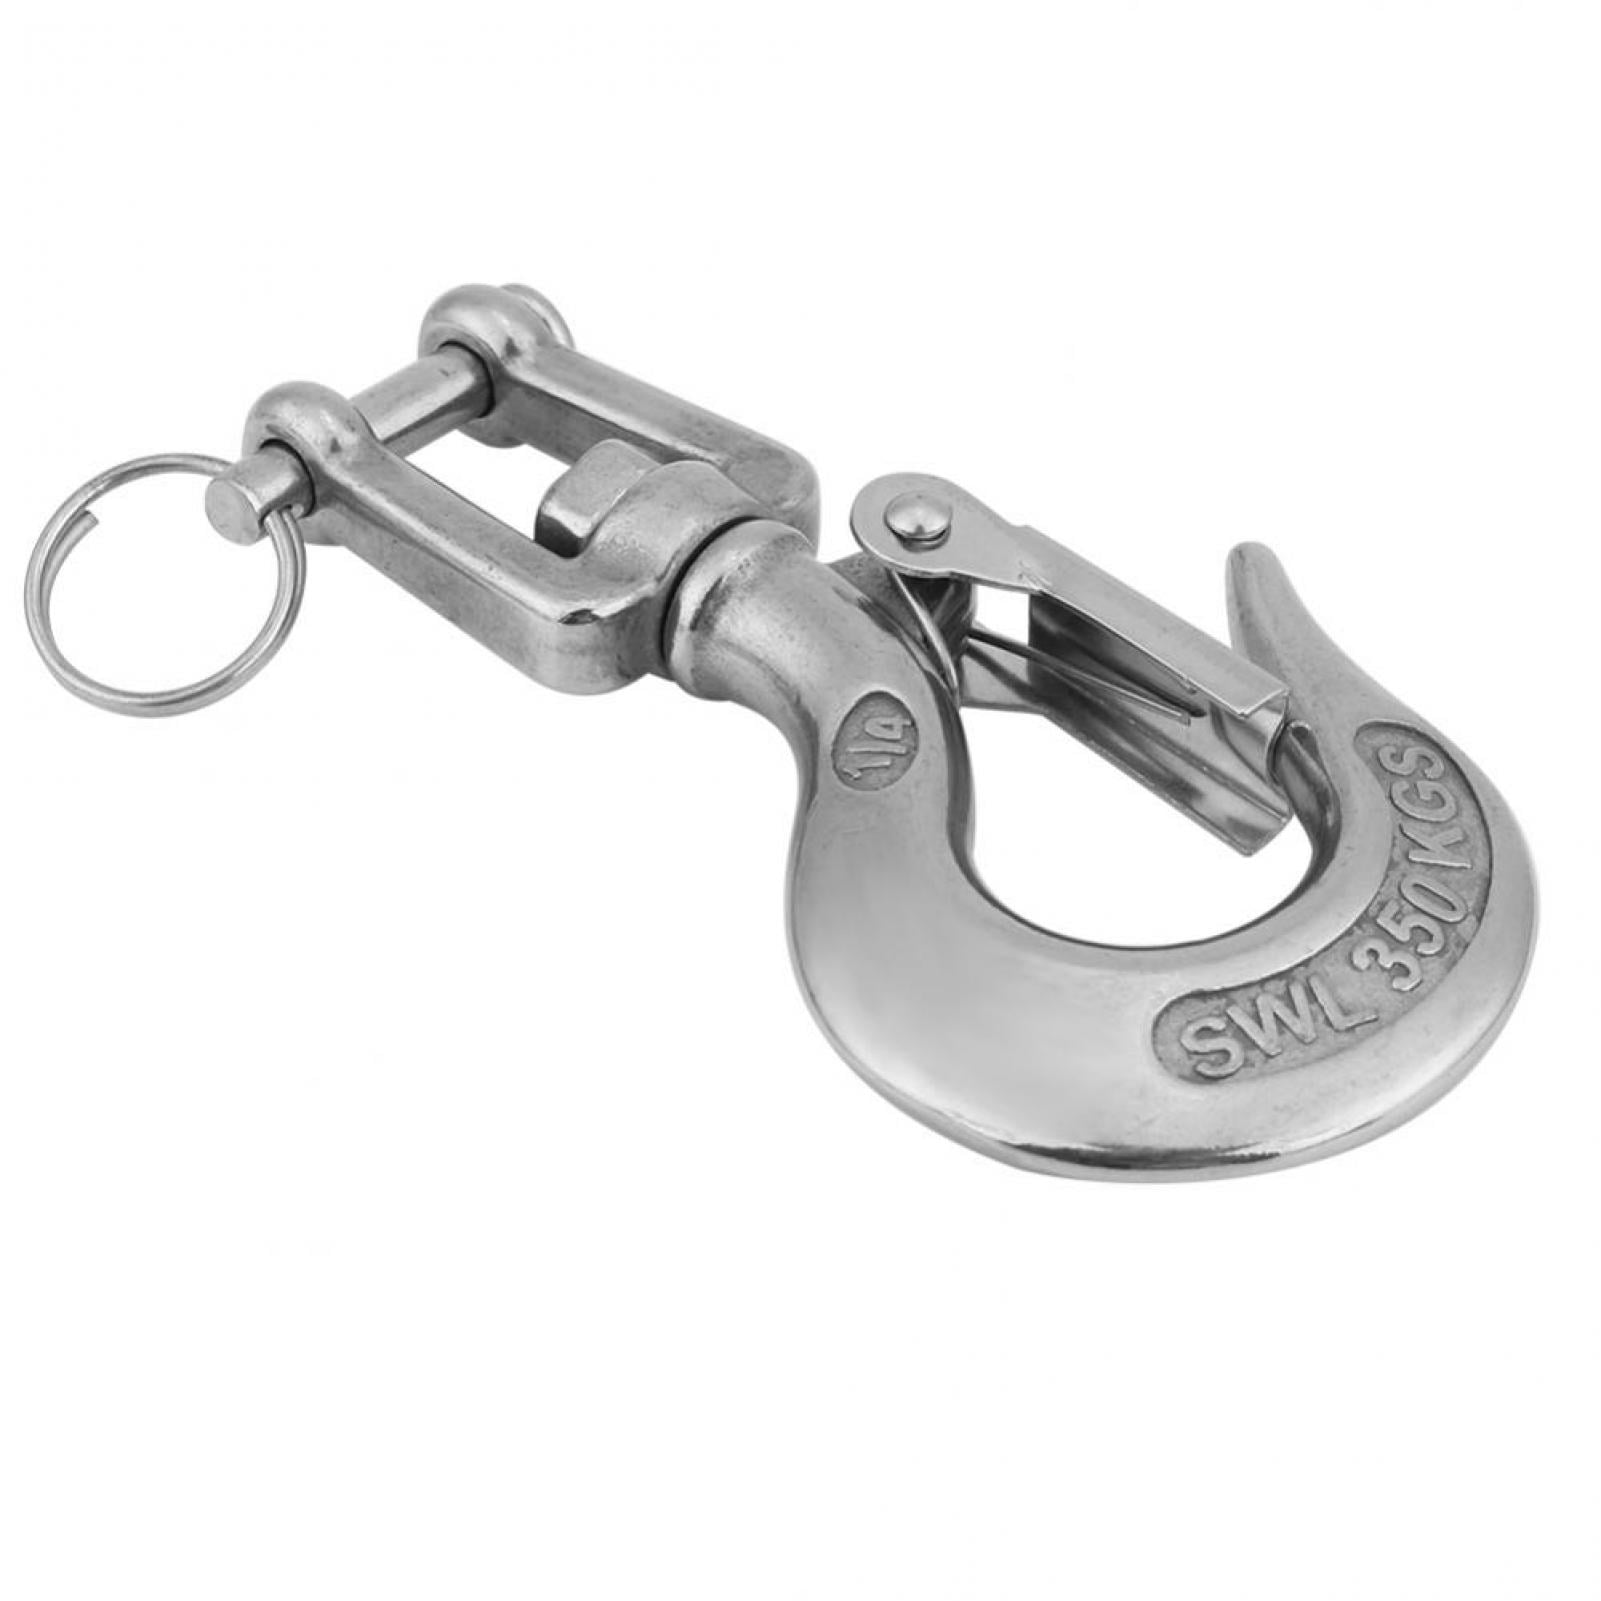 American 304 Stainless Steel Swivel Lifting Clevis Hook 150KG Working Load Limit 